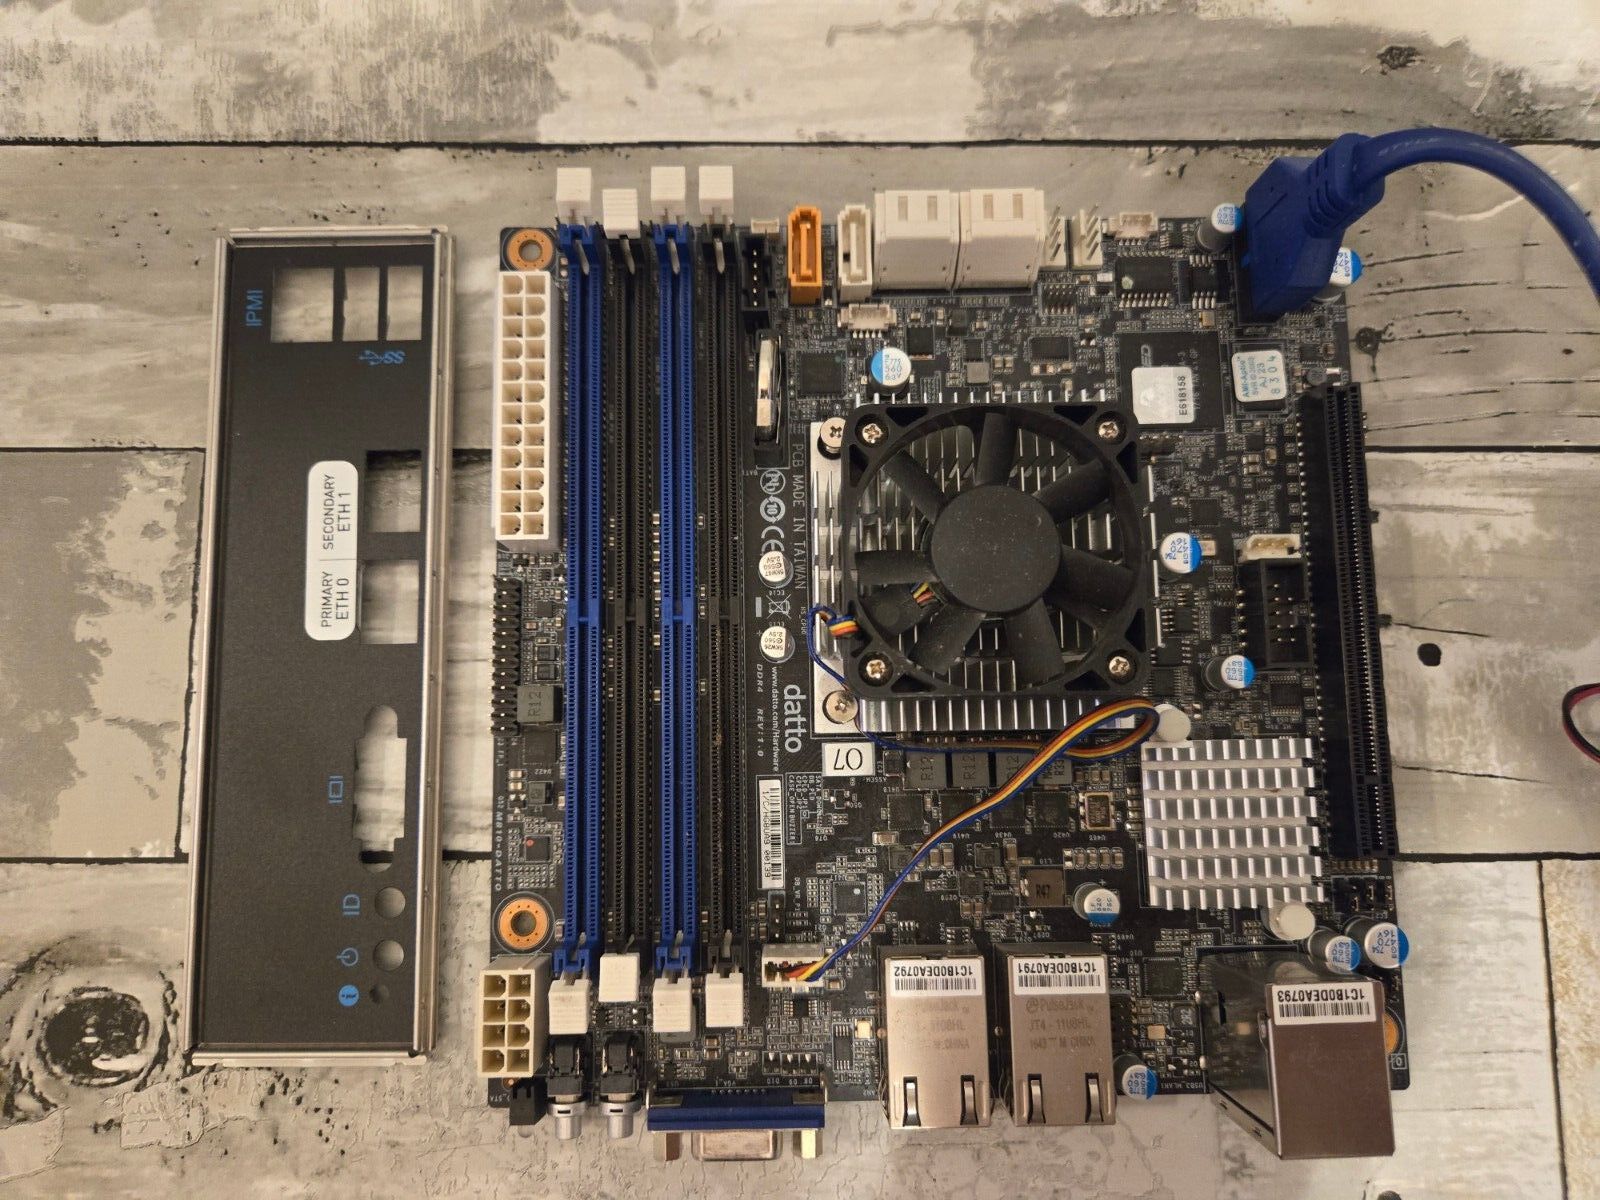 GIGABYTE MB10-Datto Motherboard Xeon D-1521- SR2DF 2.40 GHz IO Shield and cable